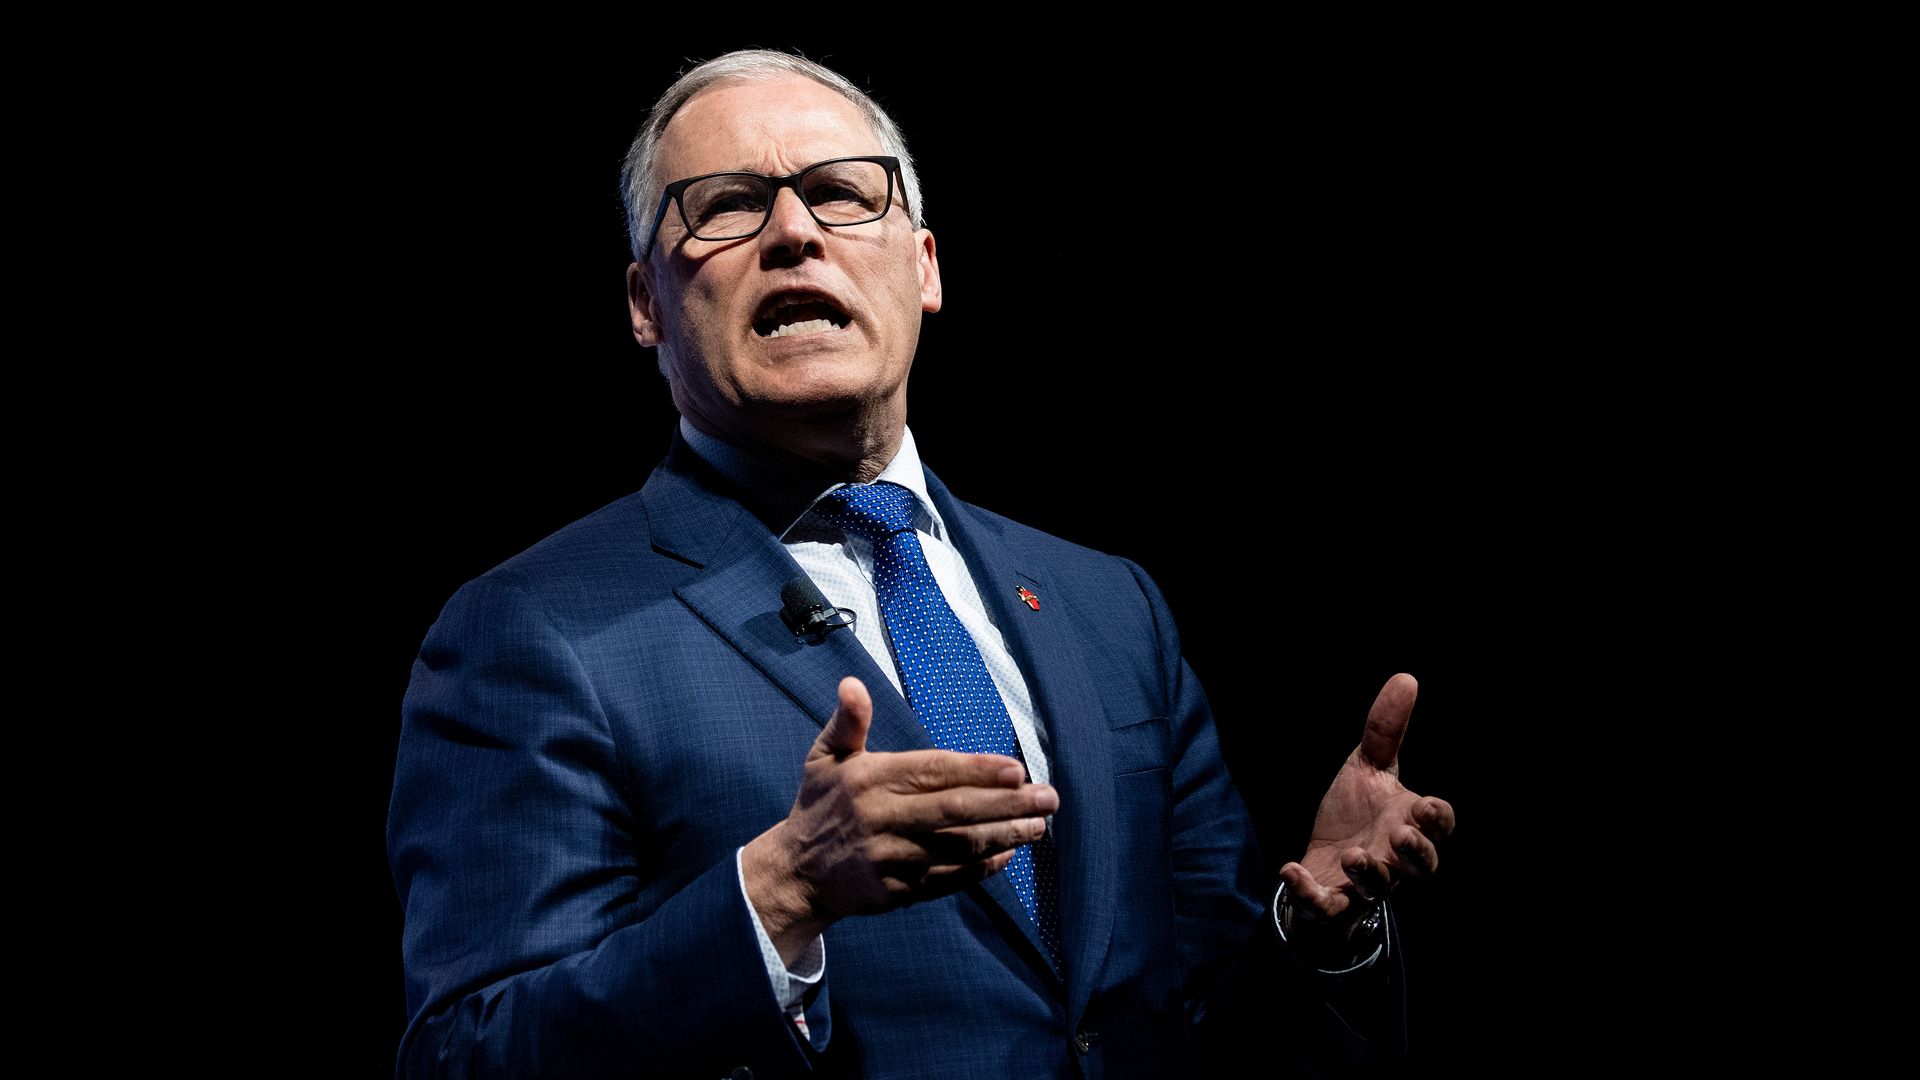 In this image, Jay Inslee speaks in a suit and tie while gesturing both hands.